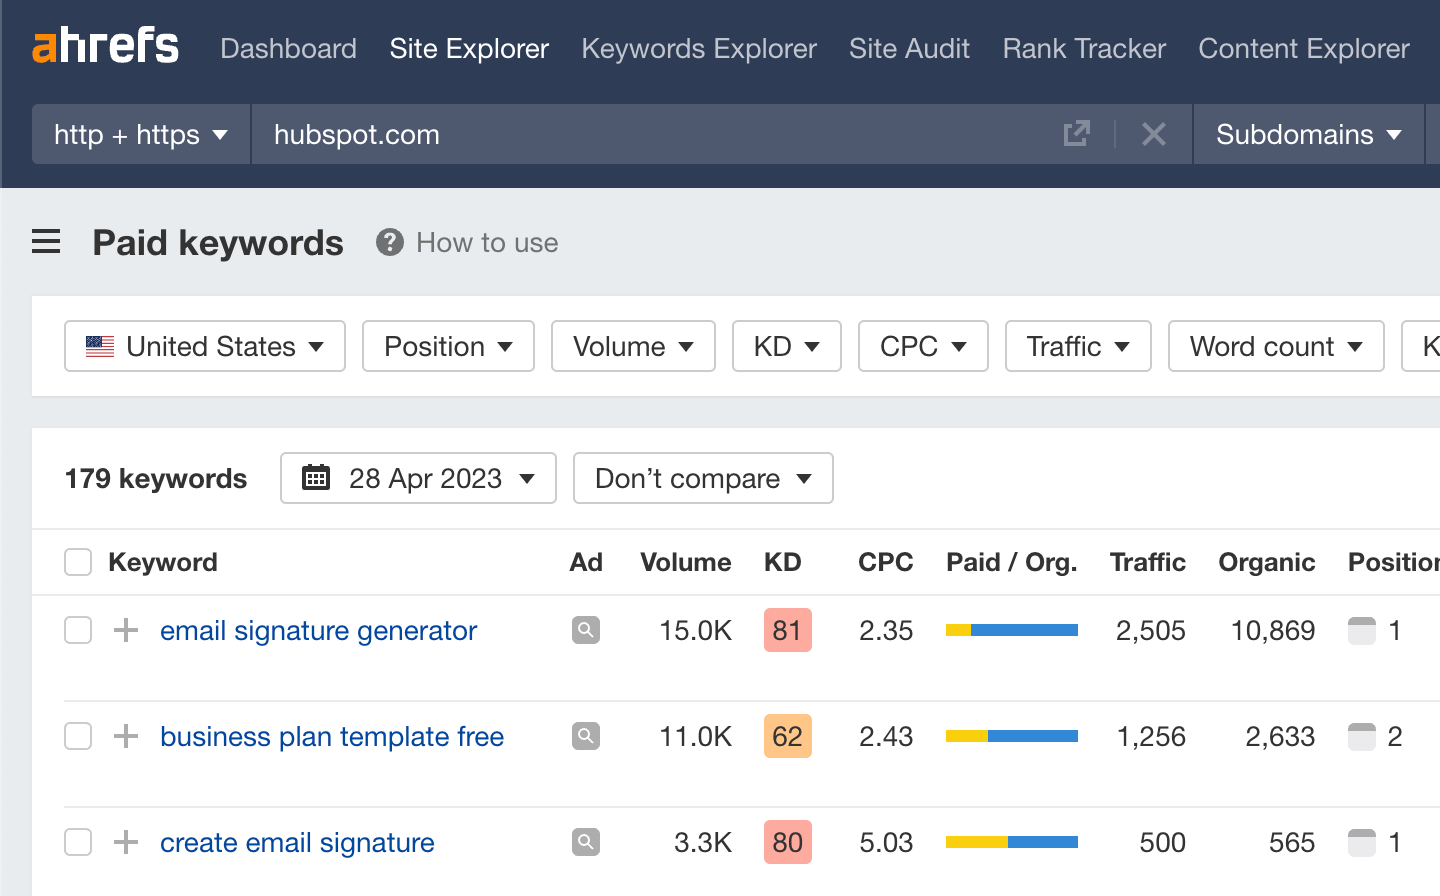 How to see your competitors' paid keywords in Ahrefs' Site Explorer
